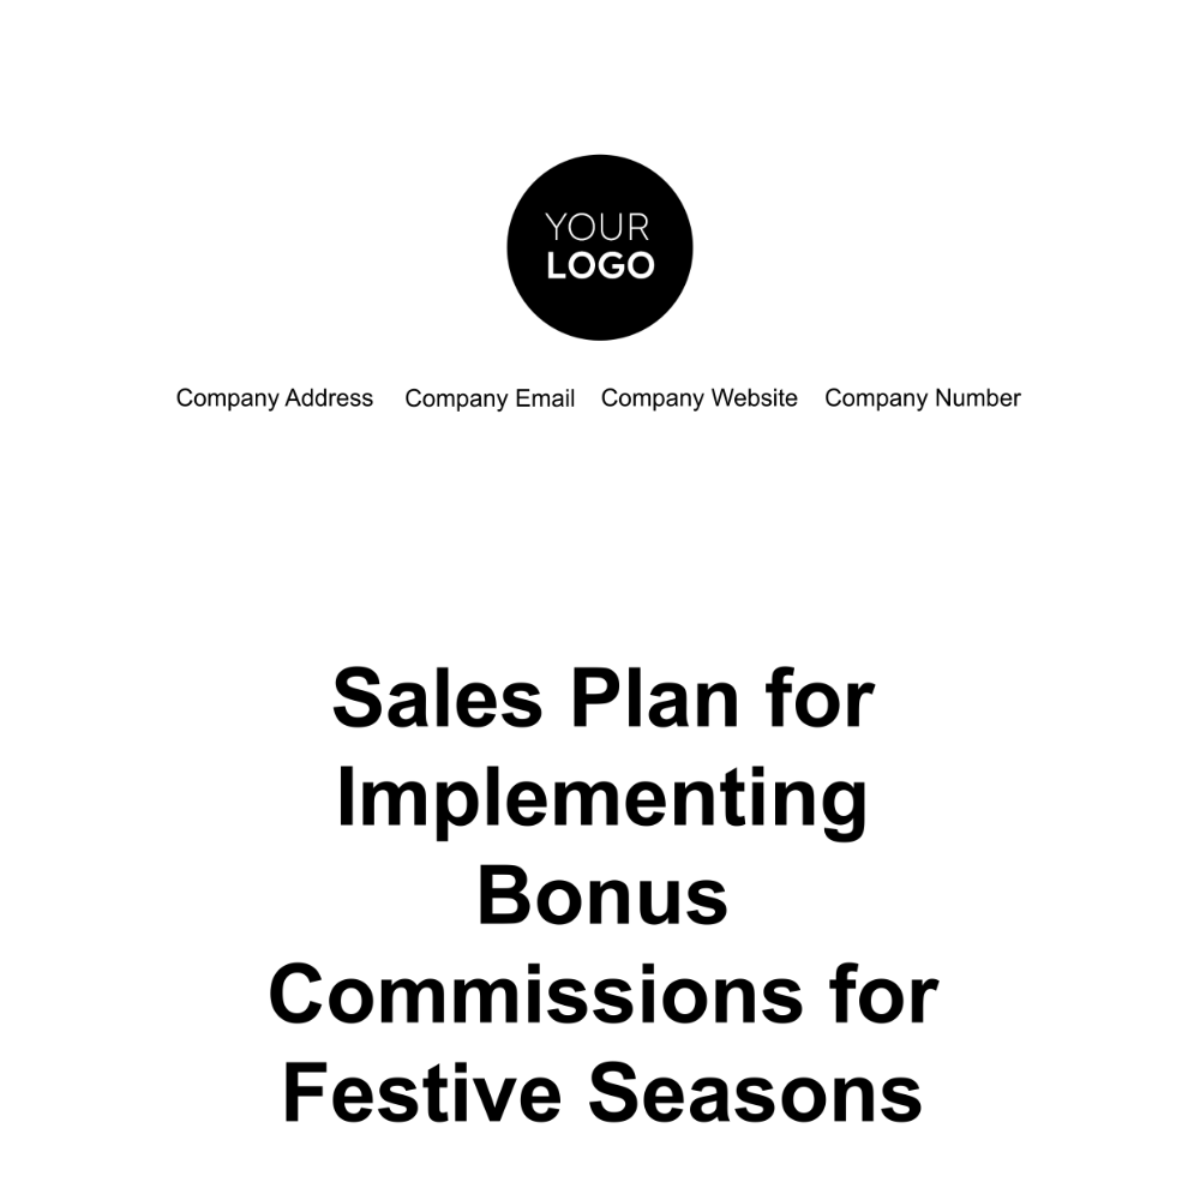 Sales Plan for Implementing Bonus Commissions for Festive Seasons Template